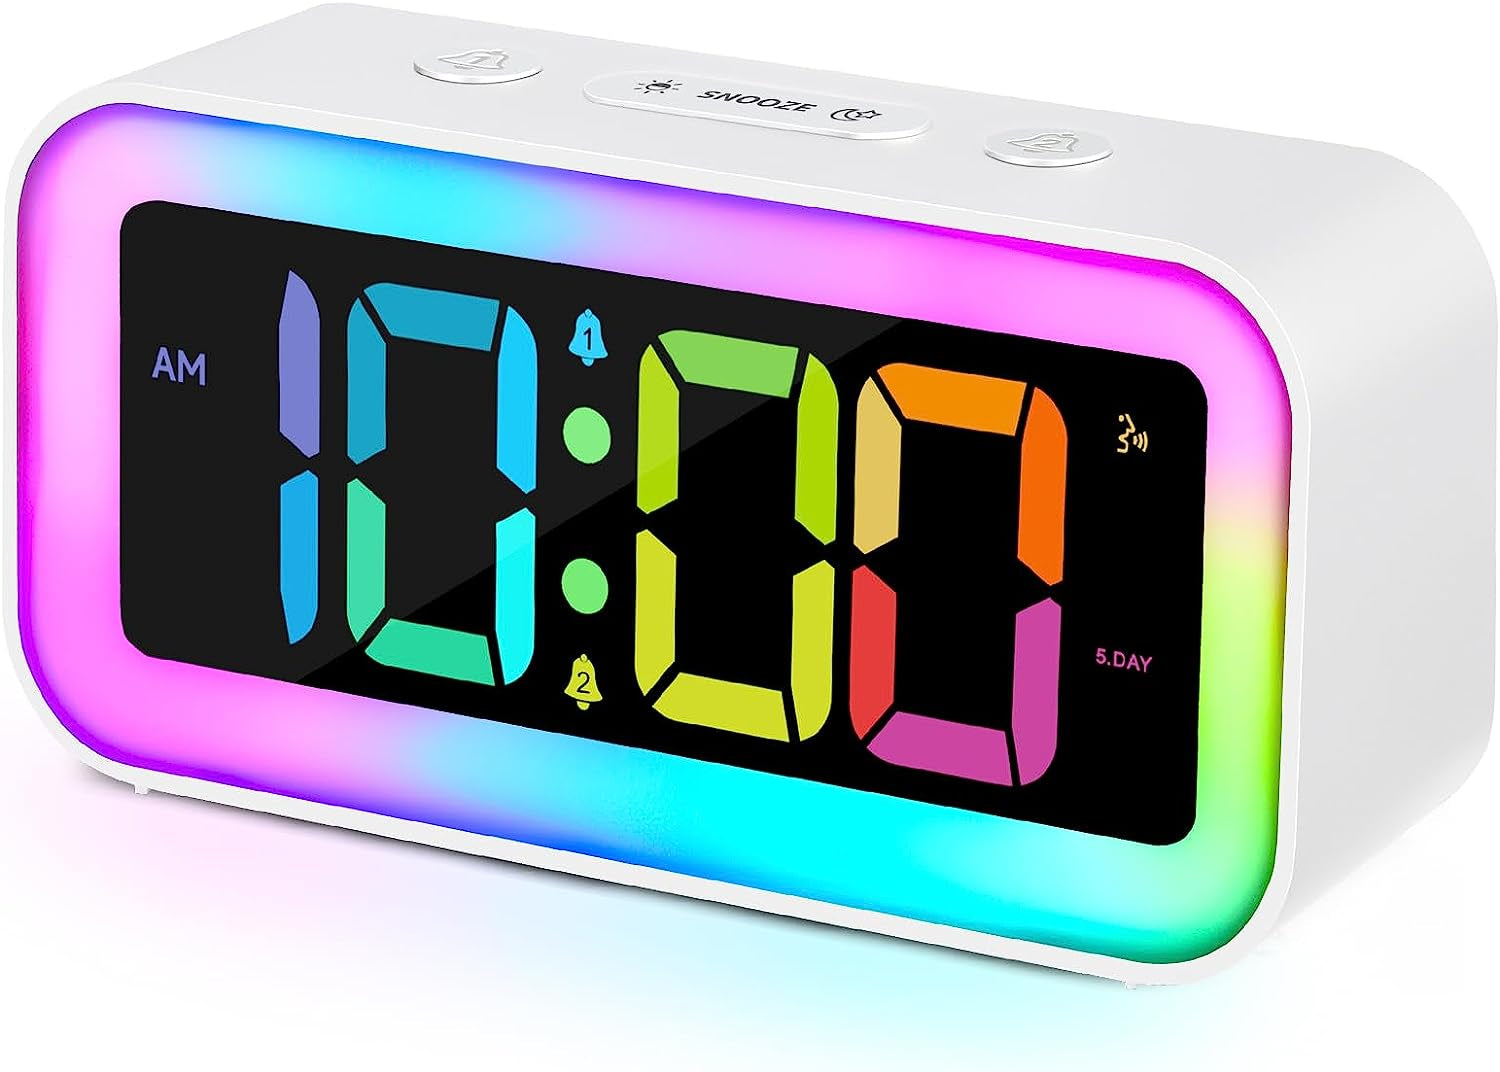 Loud Alarm Clock for Bedrooms with Dynamic RGB Night Light,Heavy Sleepers Adults,Dual Alarm,Dimmer,Usb Charger,Small Bedside Digital Clock with Led Display for Kids,Teens,Seniors (White)